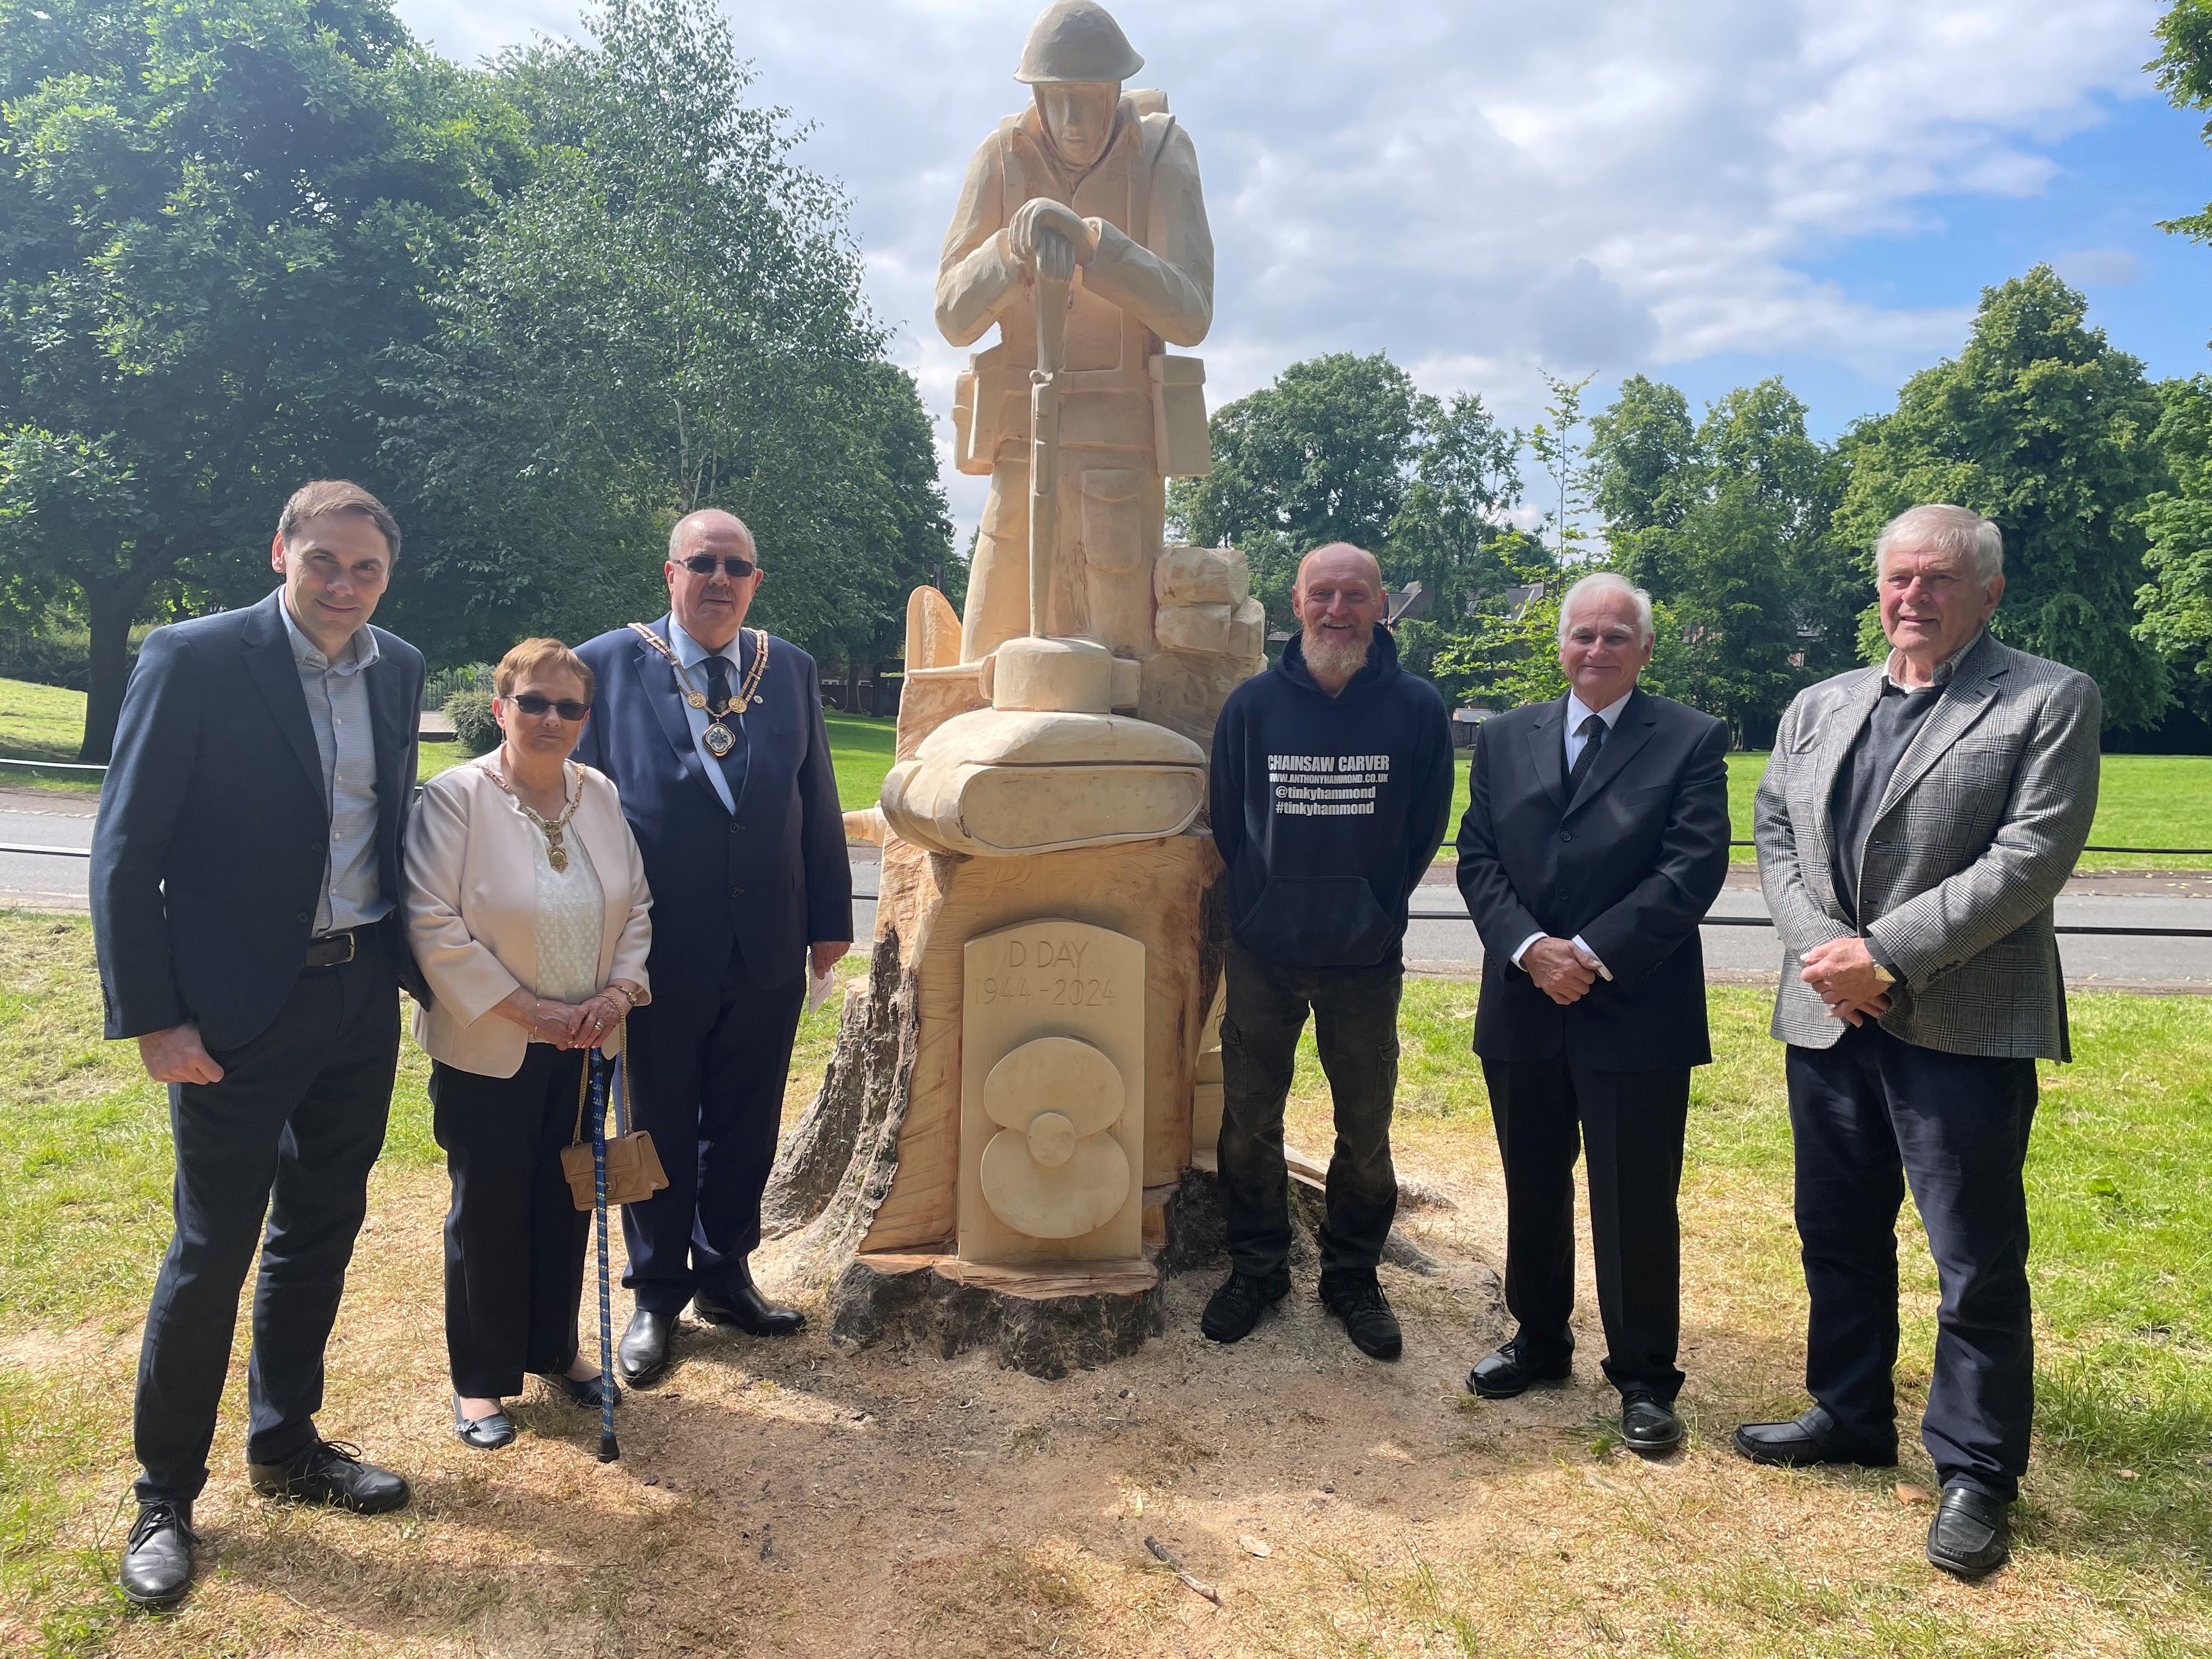 Pictured, left to right, with the D-Day carving at Brampton Park are Council Leader Simon Tagg, Mayoress Beatrice Panter, Mayor Barry Panter, sculptor Anthony Hammond and North Staffs Model Engineering Society members Mike Barnett and Rodger Taylor.